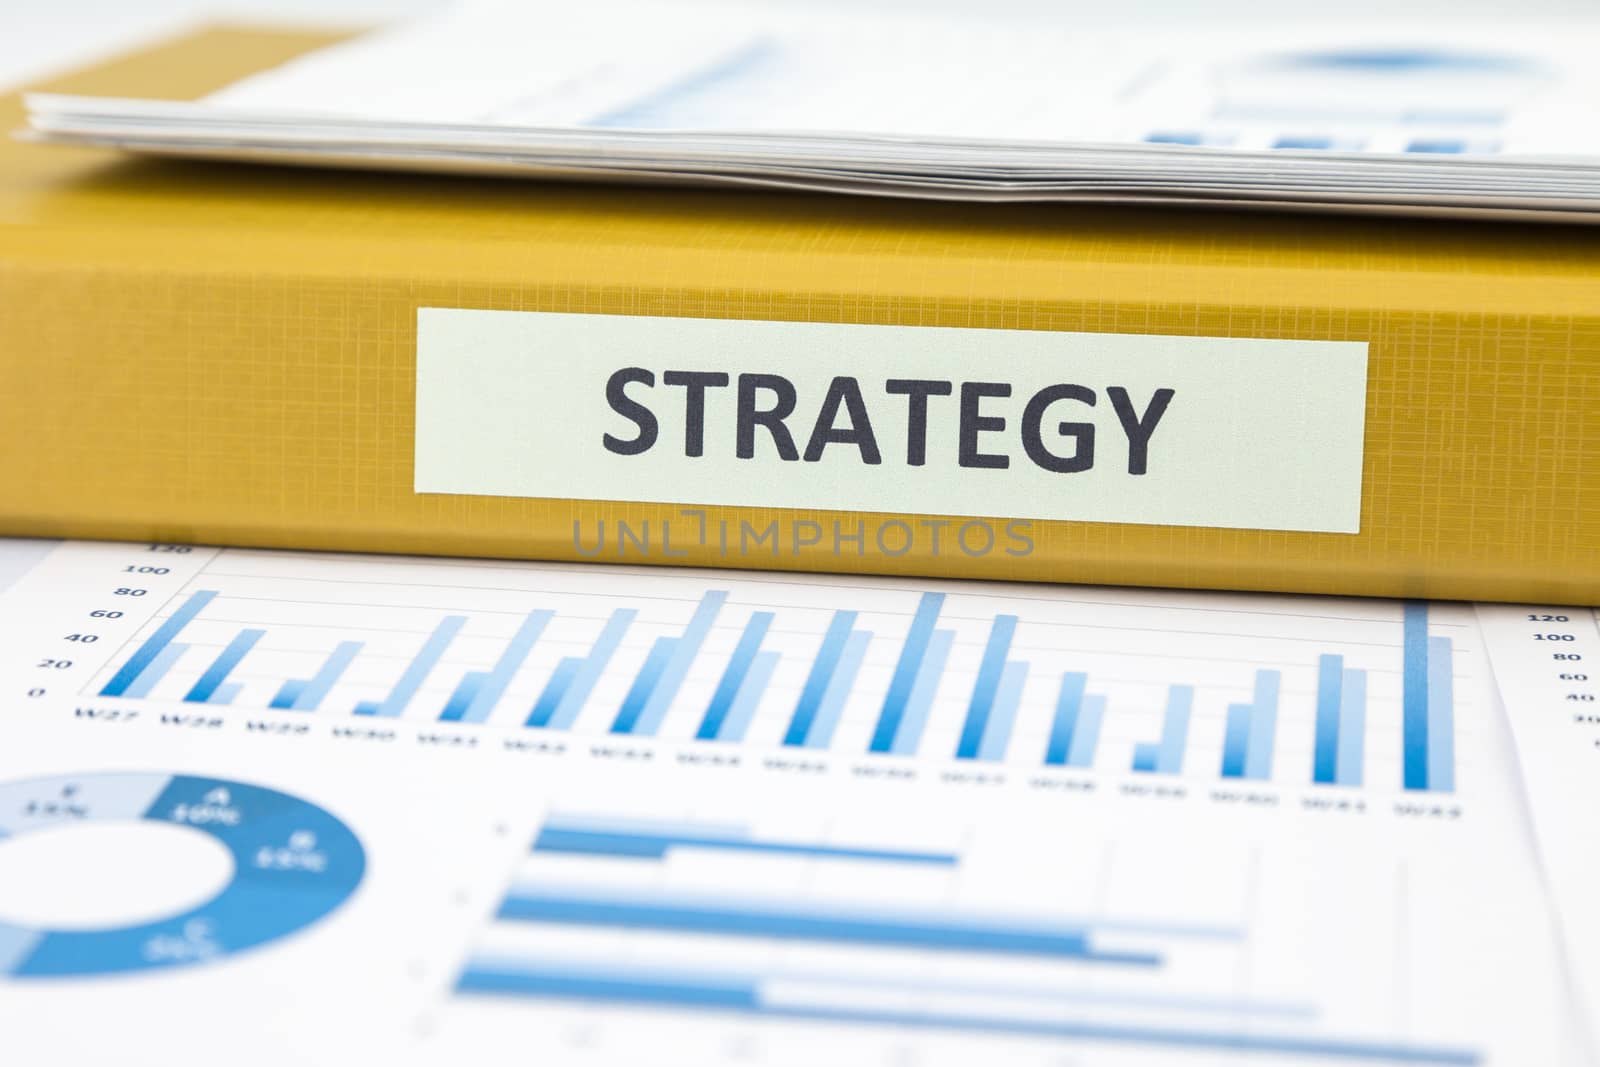 Business strategy with data analysis and graphs by vinnstock